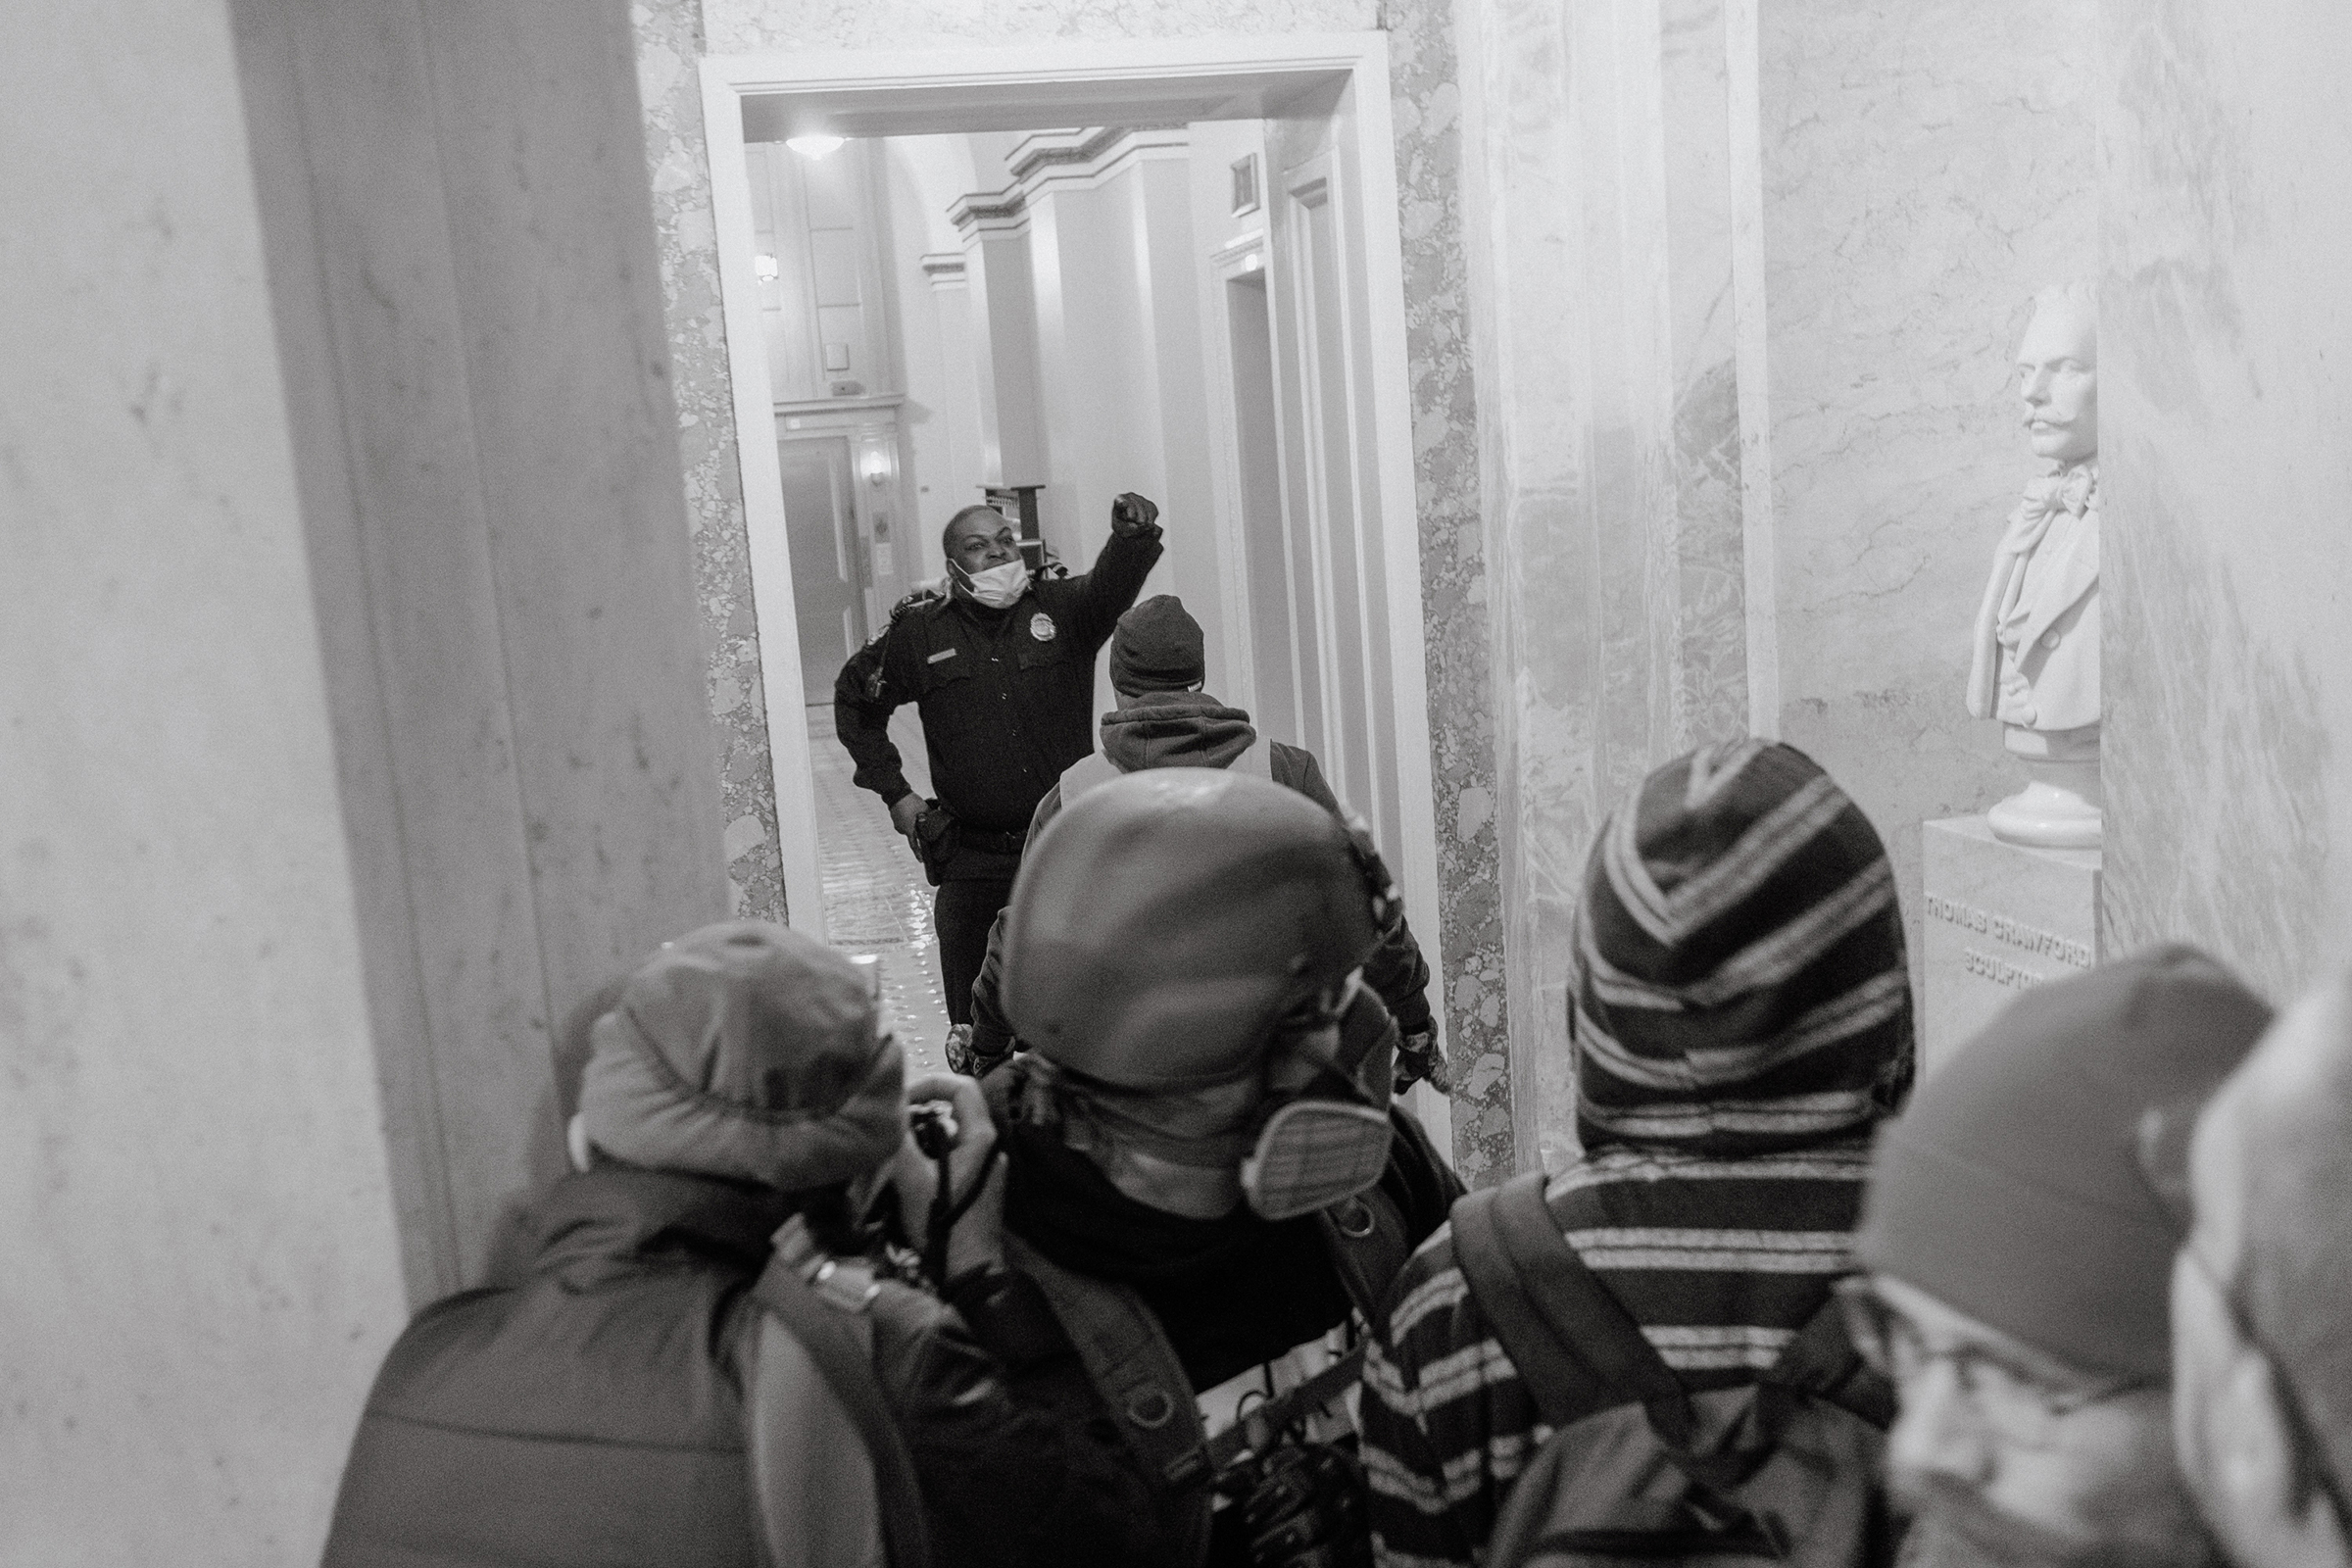 Capitol Police officer Eugene Goodman confronts supporters of President Donald Trump who invaded the building on Jan. 6 to stop the certification of Joe Biden’s 2020 election win. Goodman directs an angry mob away from the Senate chamber toward police. (Christopher Lee for TIME)